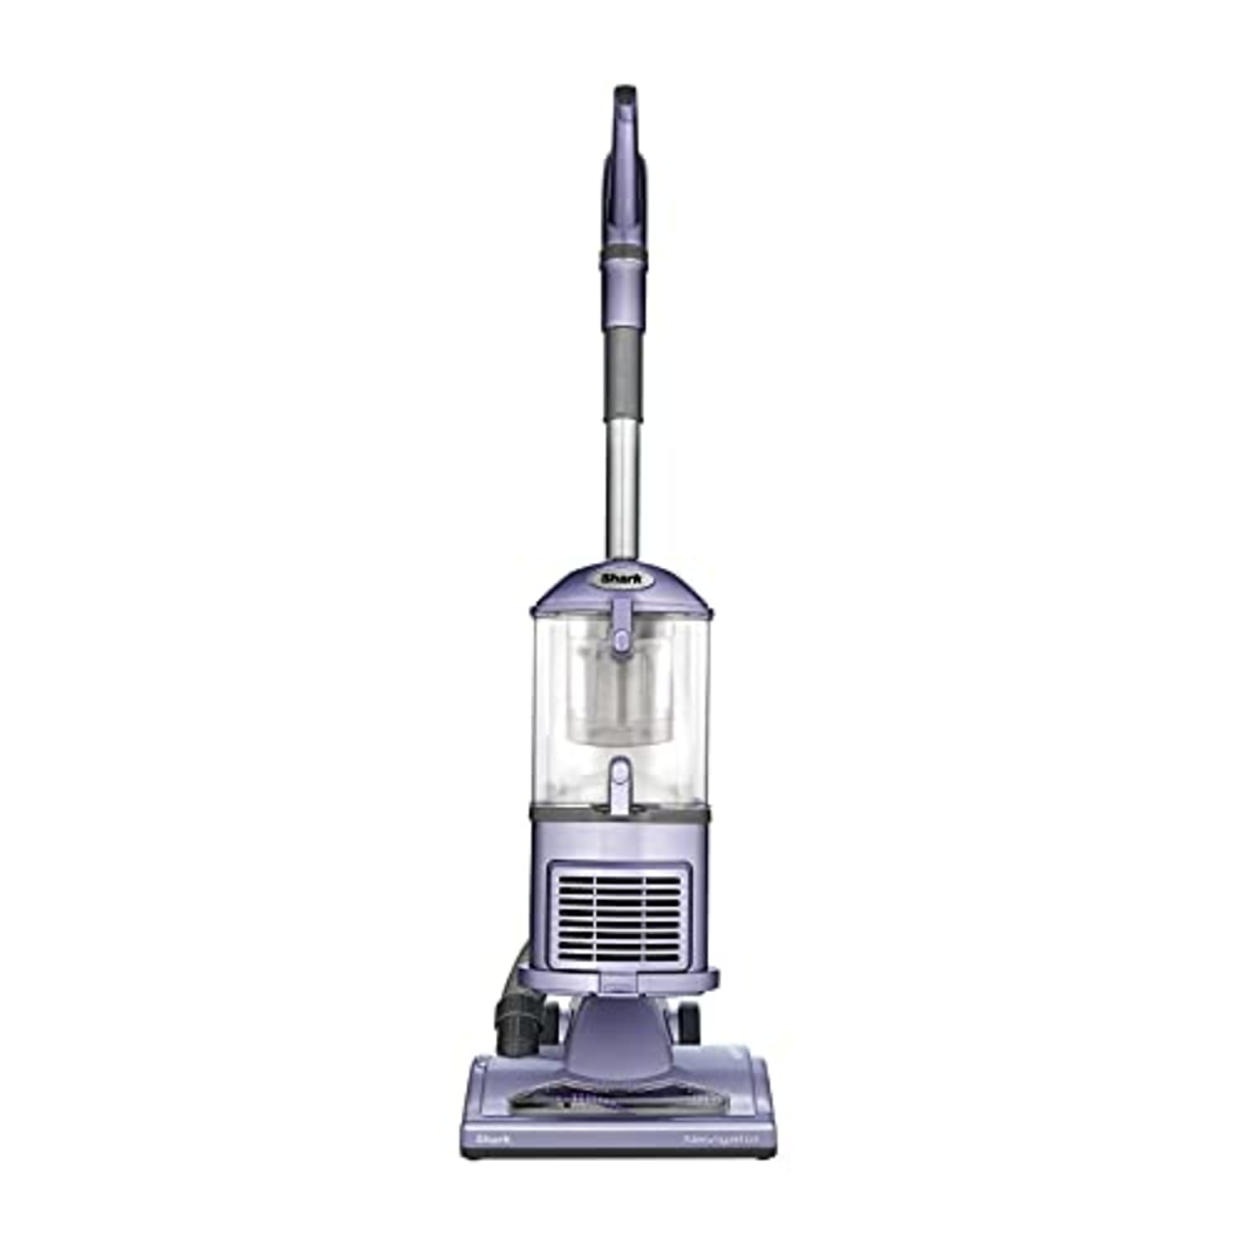 Shark NV352 Navigator Lift Away Upright Vacuum, Hepa Filter, Anti-Allergen Technology, Swivel Steering, Ideal for Carpet, Stairs, & Bare Floors, with Wide Upholstery & Crevice Tools, Lavender (AMAZON)